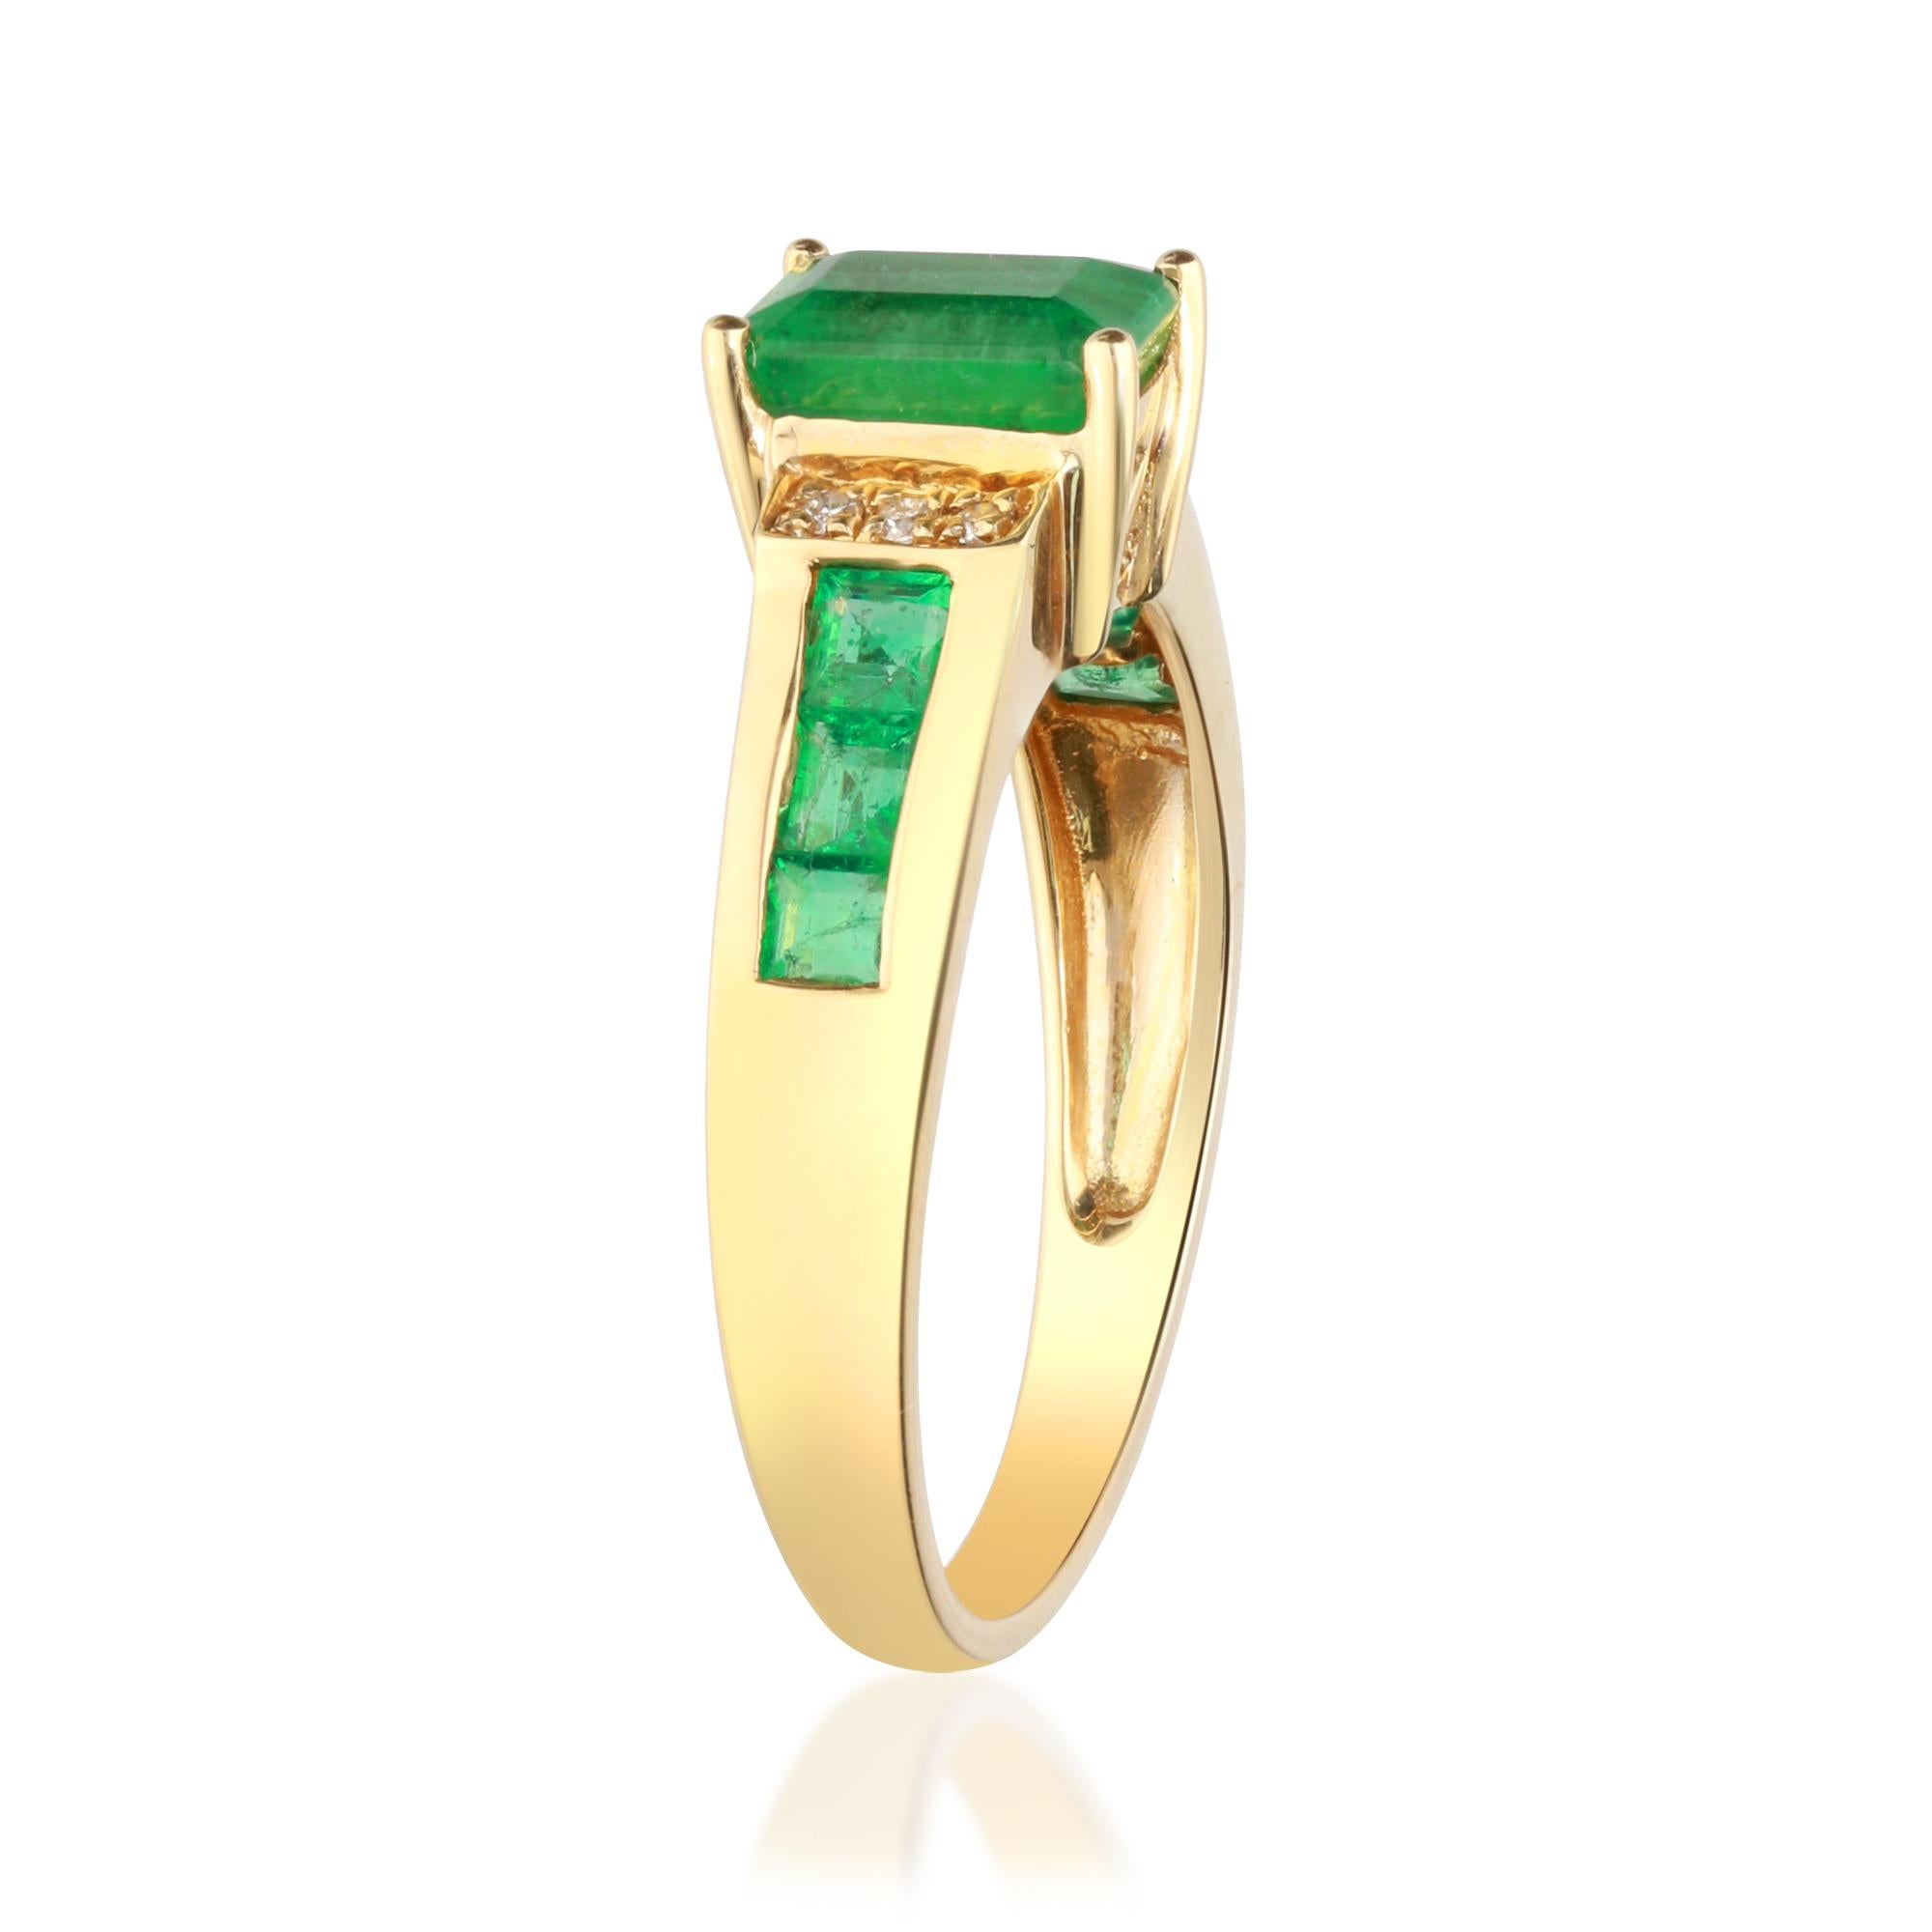 Gin & Grace These Natural Emeralds set within a highly polished setting exemplify taste and elegance, with deep, rich color in a classic square cut. Offset with 6 white round-cut diamonds and 6 princess-cut emerald side stones inside channels, the